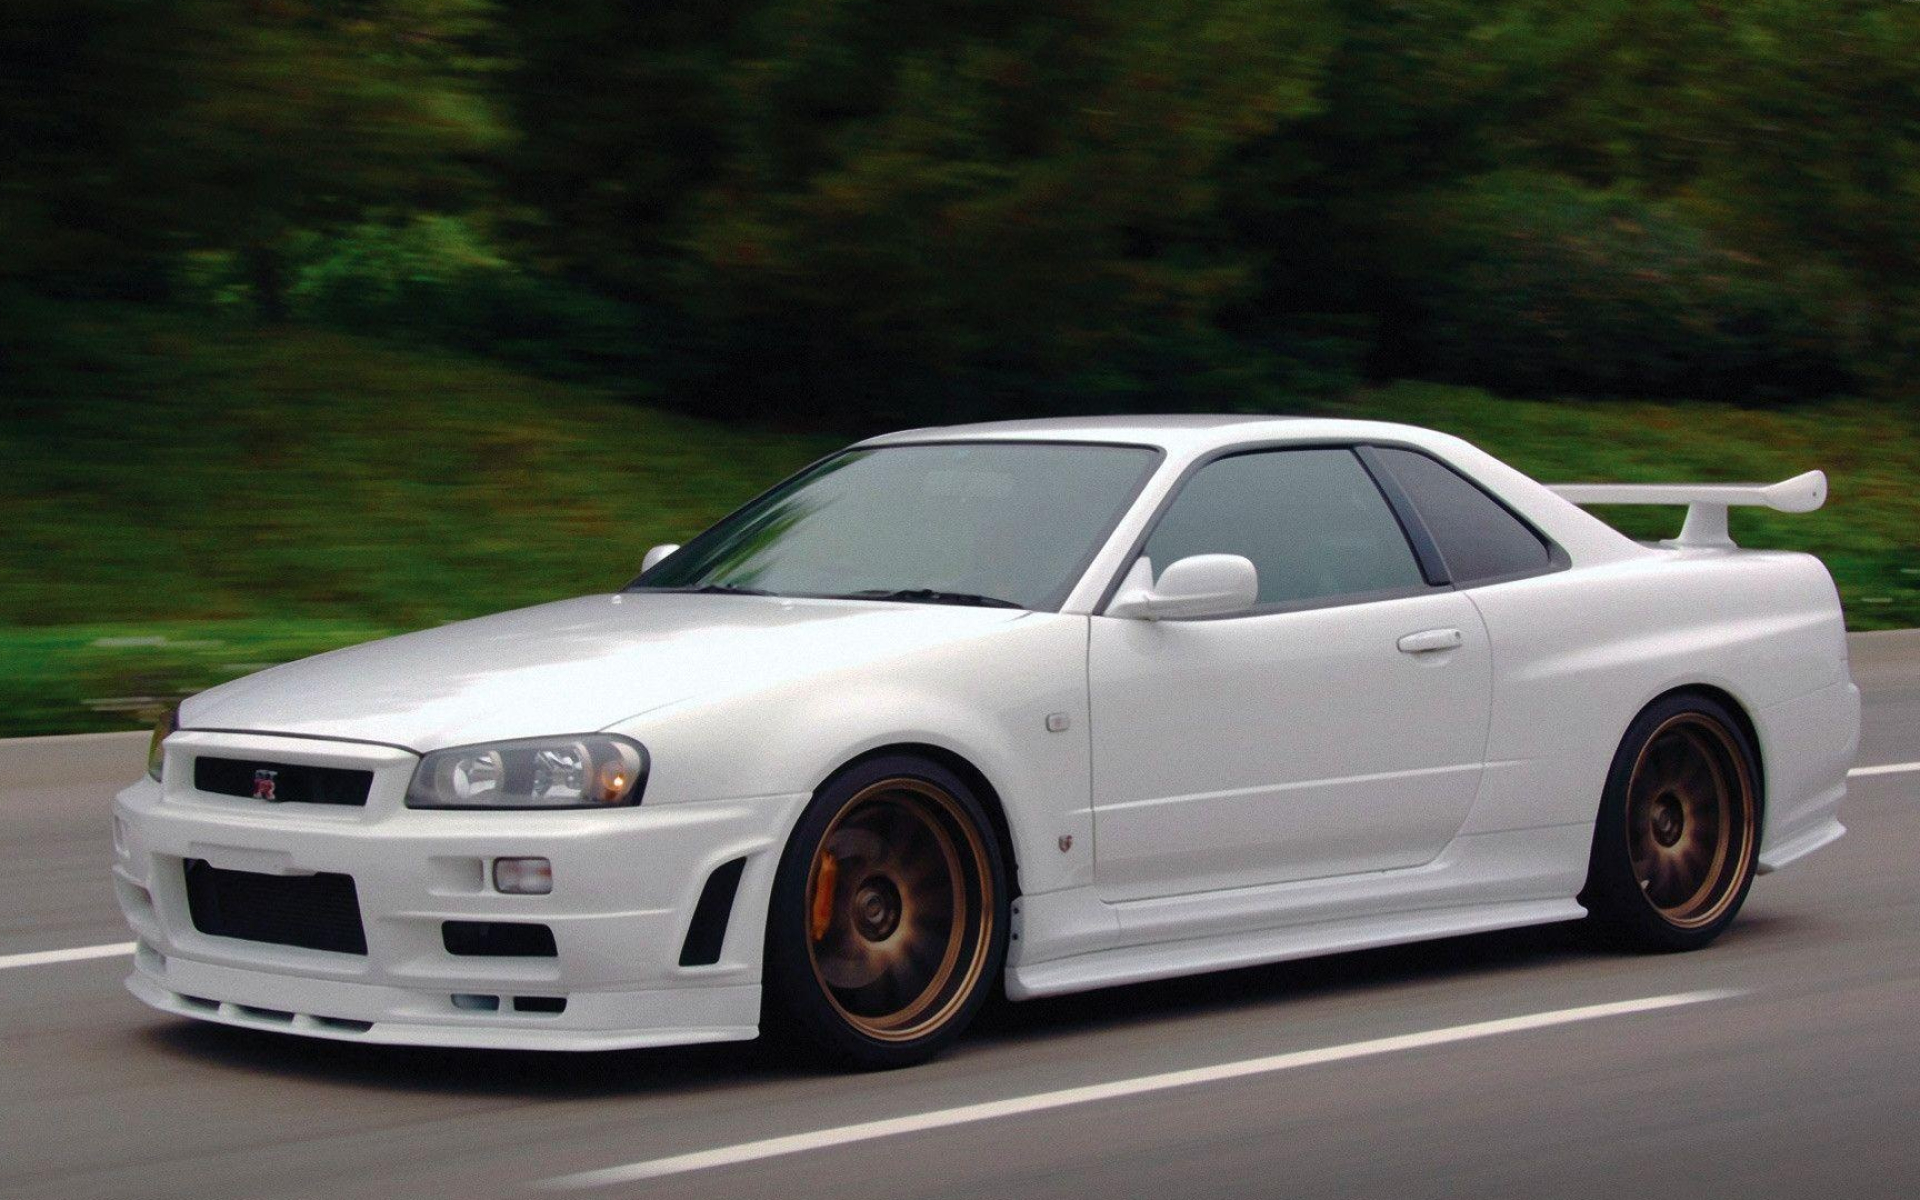 Nissan Skyline R34, Beautiful wallpapers, GT R R34 collection, Stunning images, 1920x1200 HD Desktop